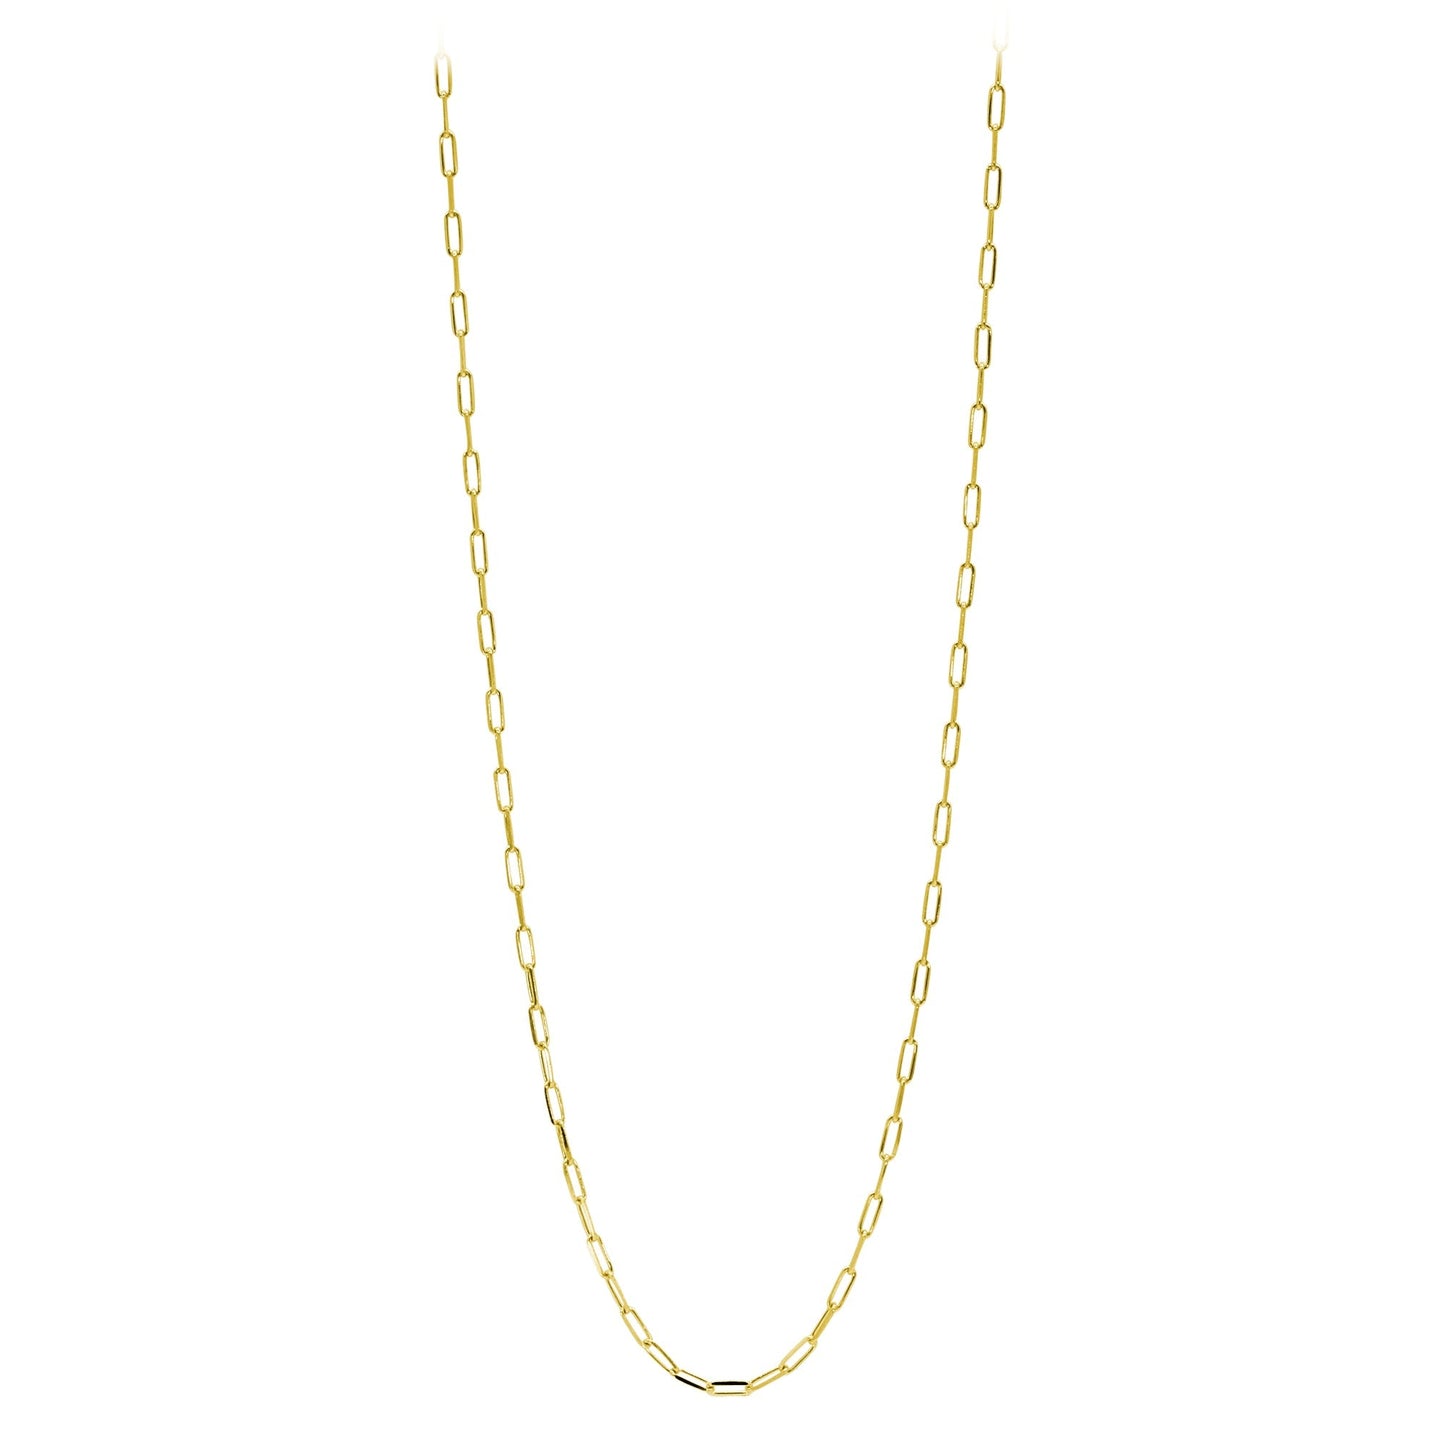 Stellari Gold 18 Karat over Sterling Silver 2.5mm Paperclip Link Chain